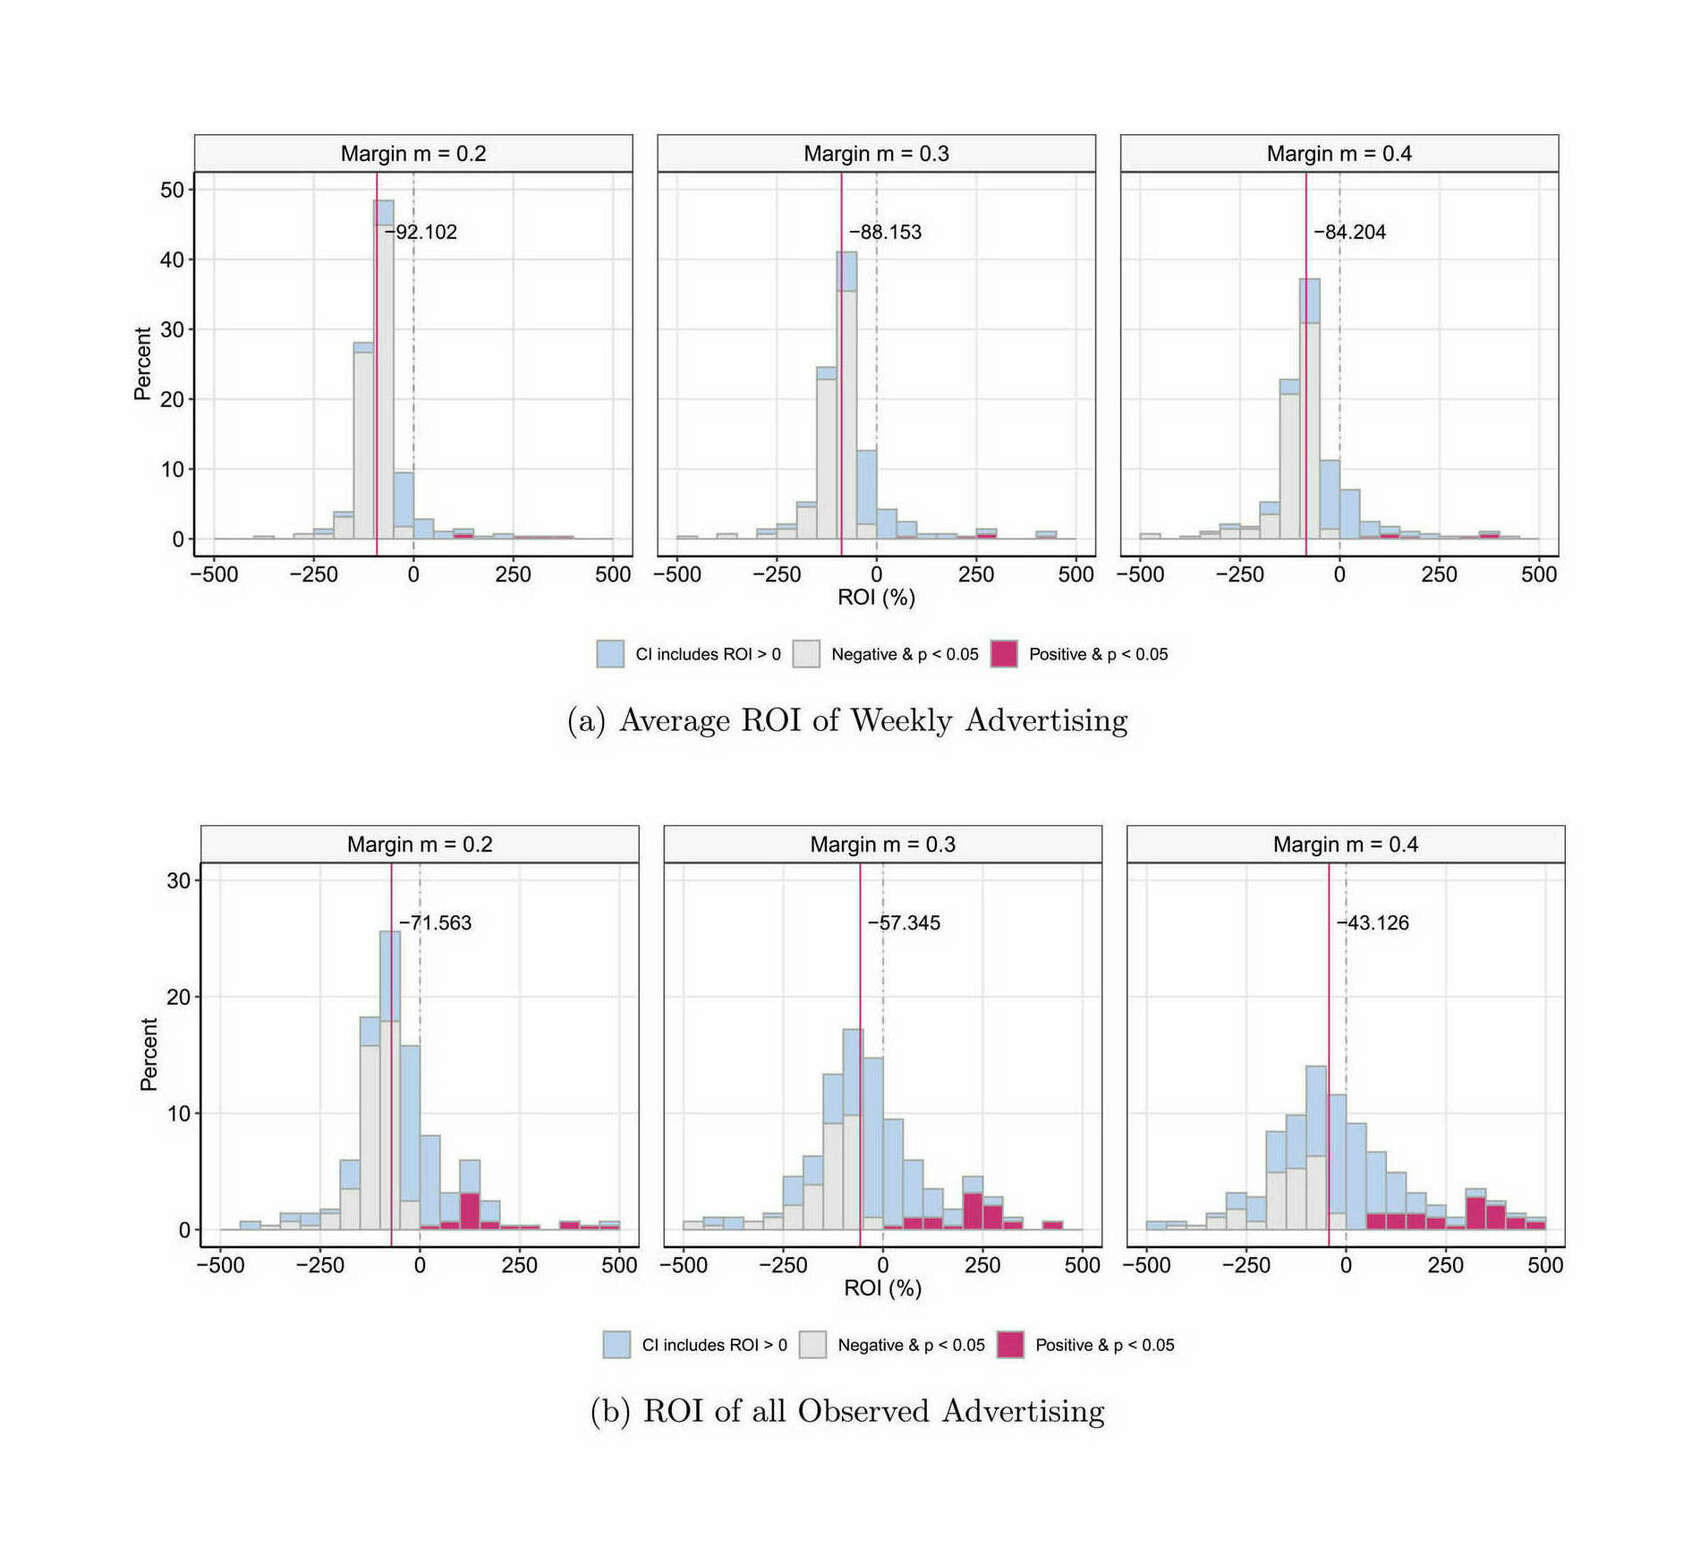 Figure 3: Predicted ROIs. Note: Panel (a) provides the distribution of the estimated ROI of weekly advertising and panel (b) provides the distribution of the overall ROI of the observed advertising schedule. Each is provided for 3 margin factors, m = 0.2, m = 0.3, and m = 0.4. The median is denoted by a solid vertical line and zero is denoted with a vertical dashed line. Gray indicates brands with negative ROI that is statistically different from zero. Red indicates brands with positive ROI that is statistically different from zero. Blue indicates brands with ROI not statistically different from zero.